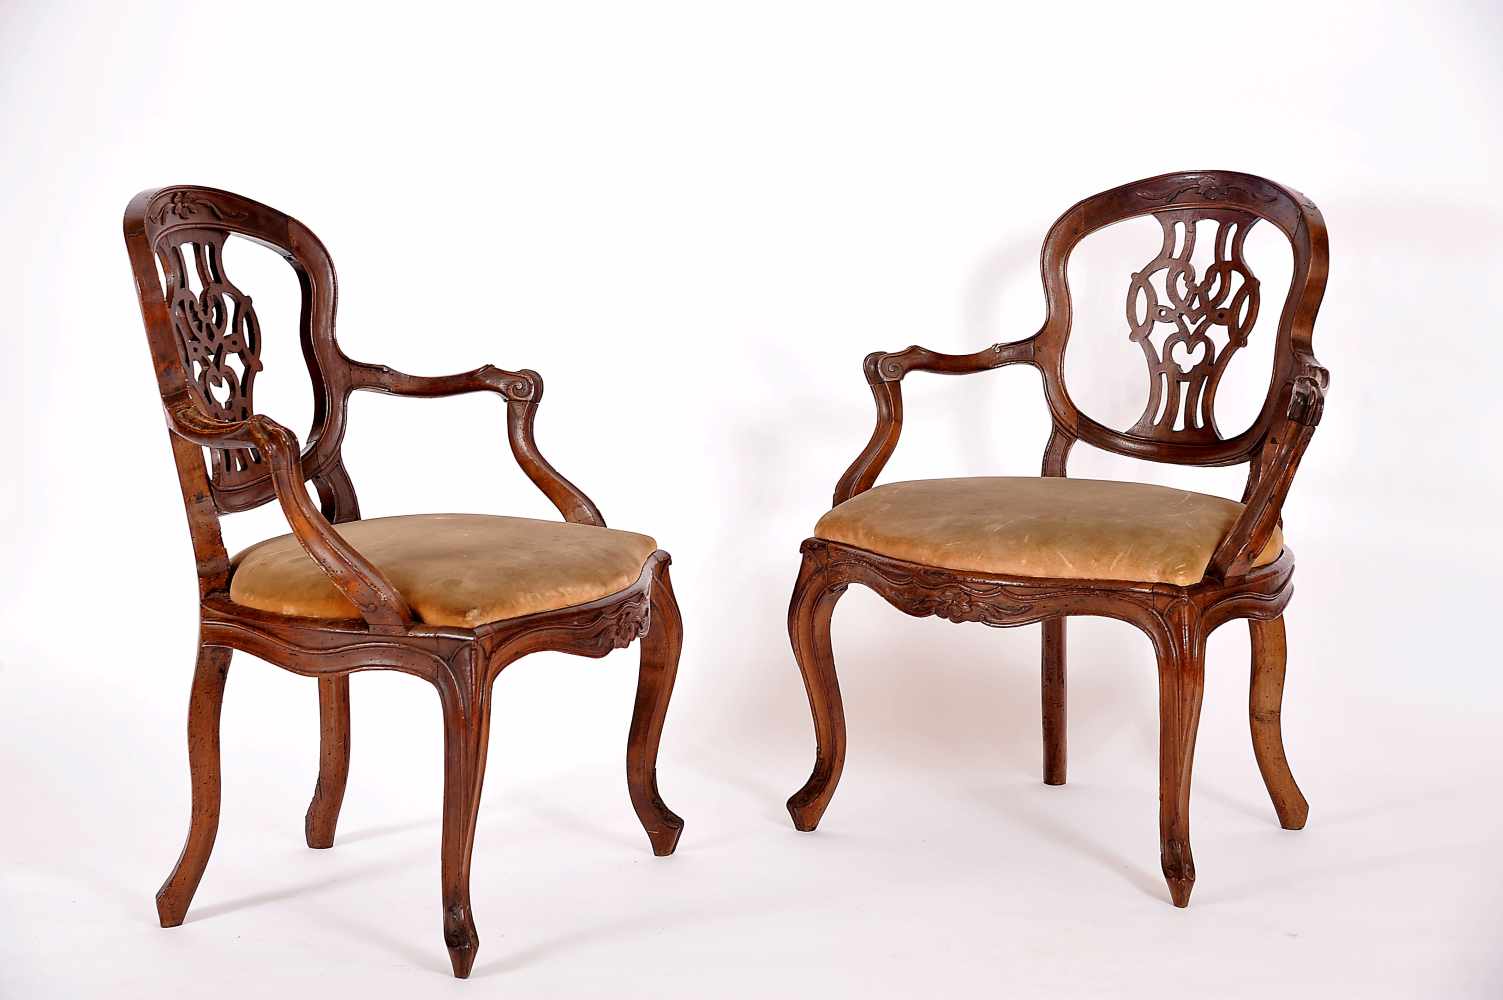 A Pair of Fauteuils, D. José I, King of Portugal (1750-1777), carved walnut, scalloped and pierced